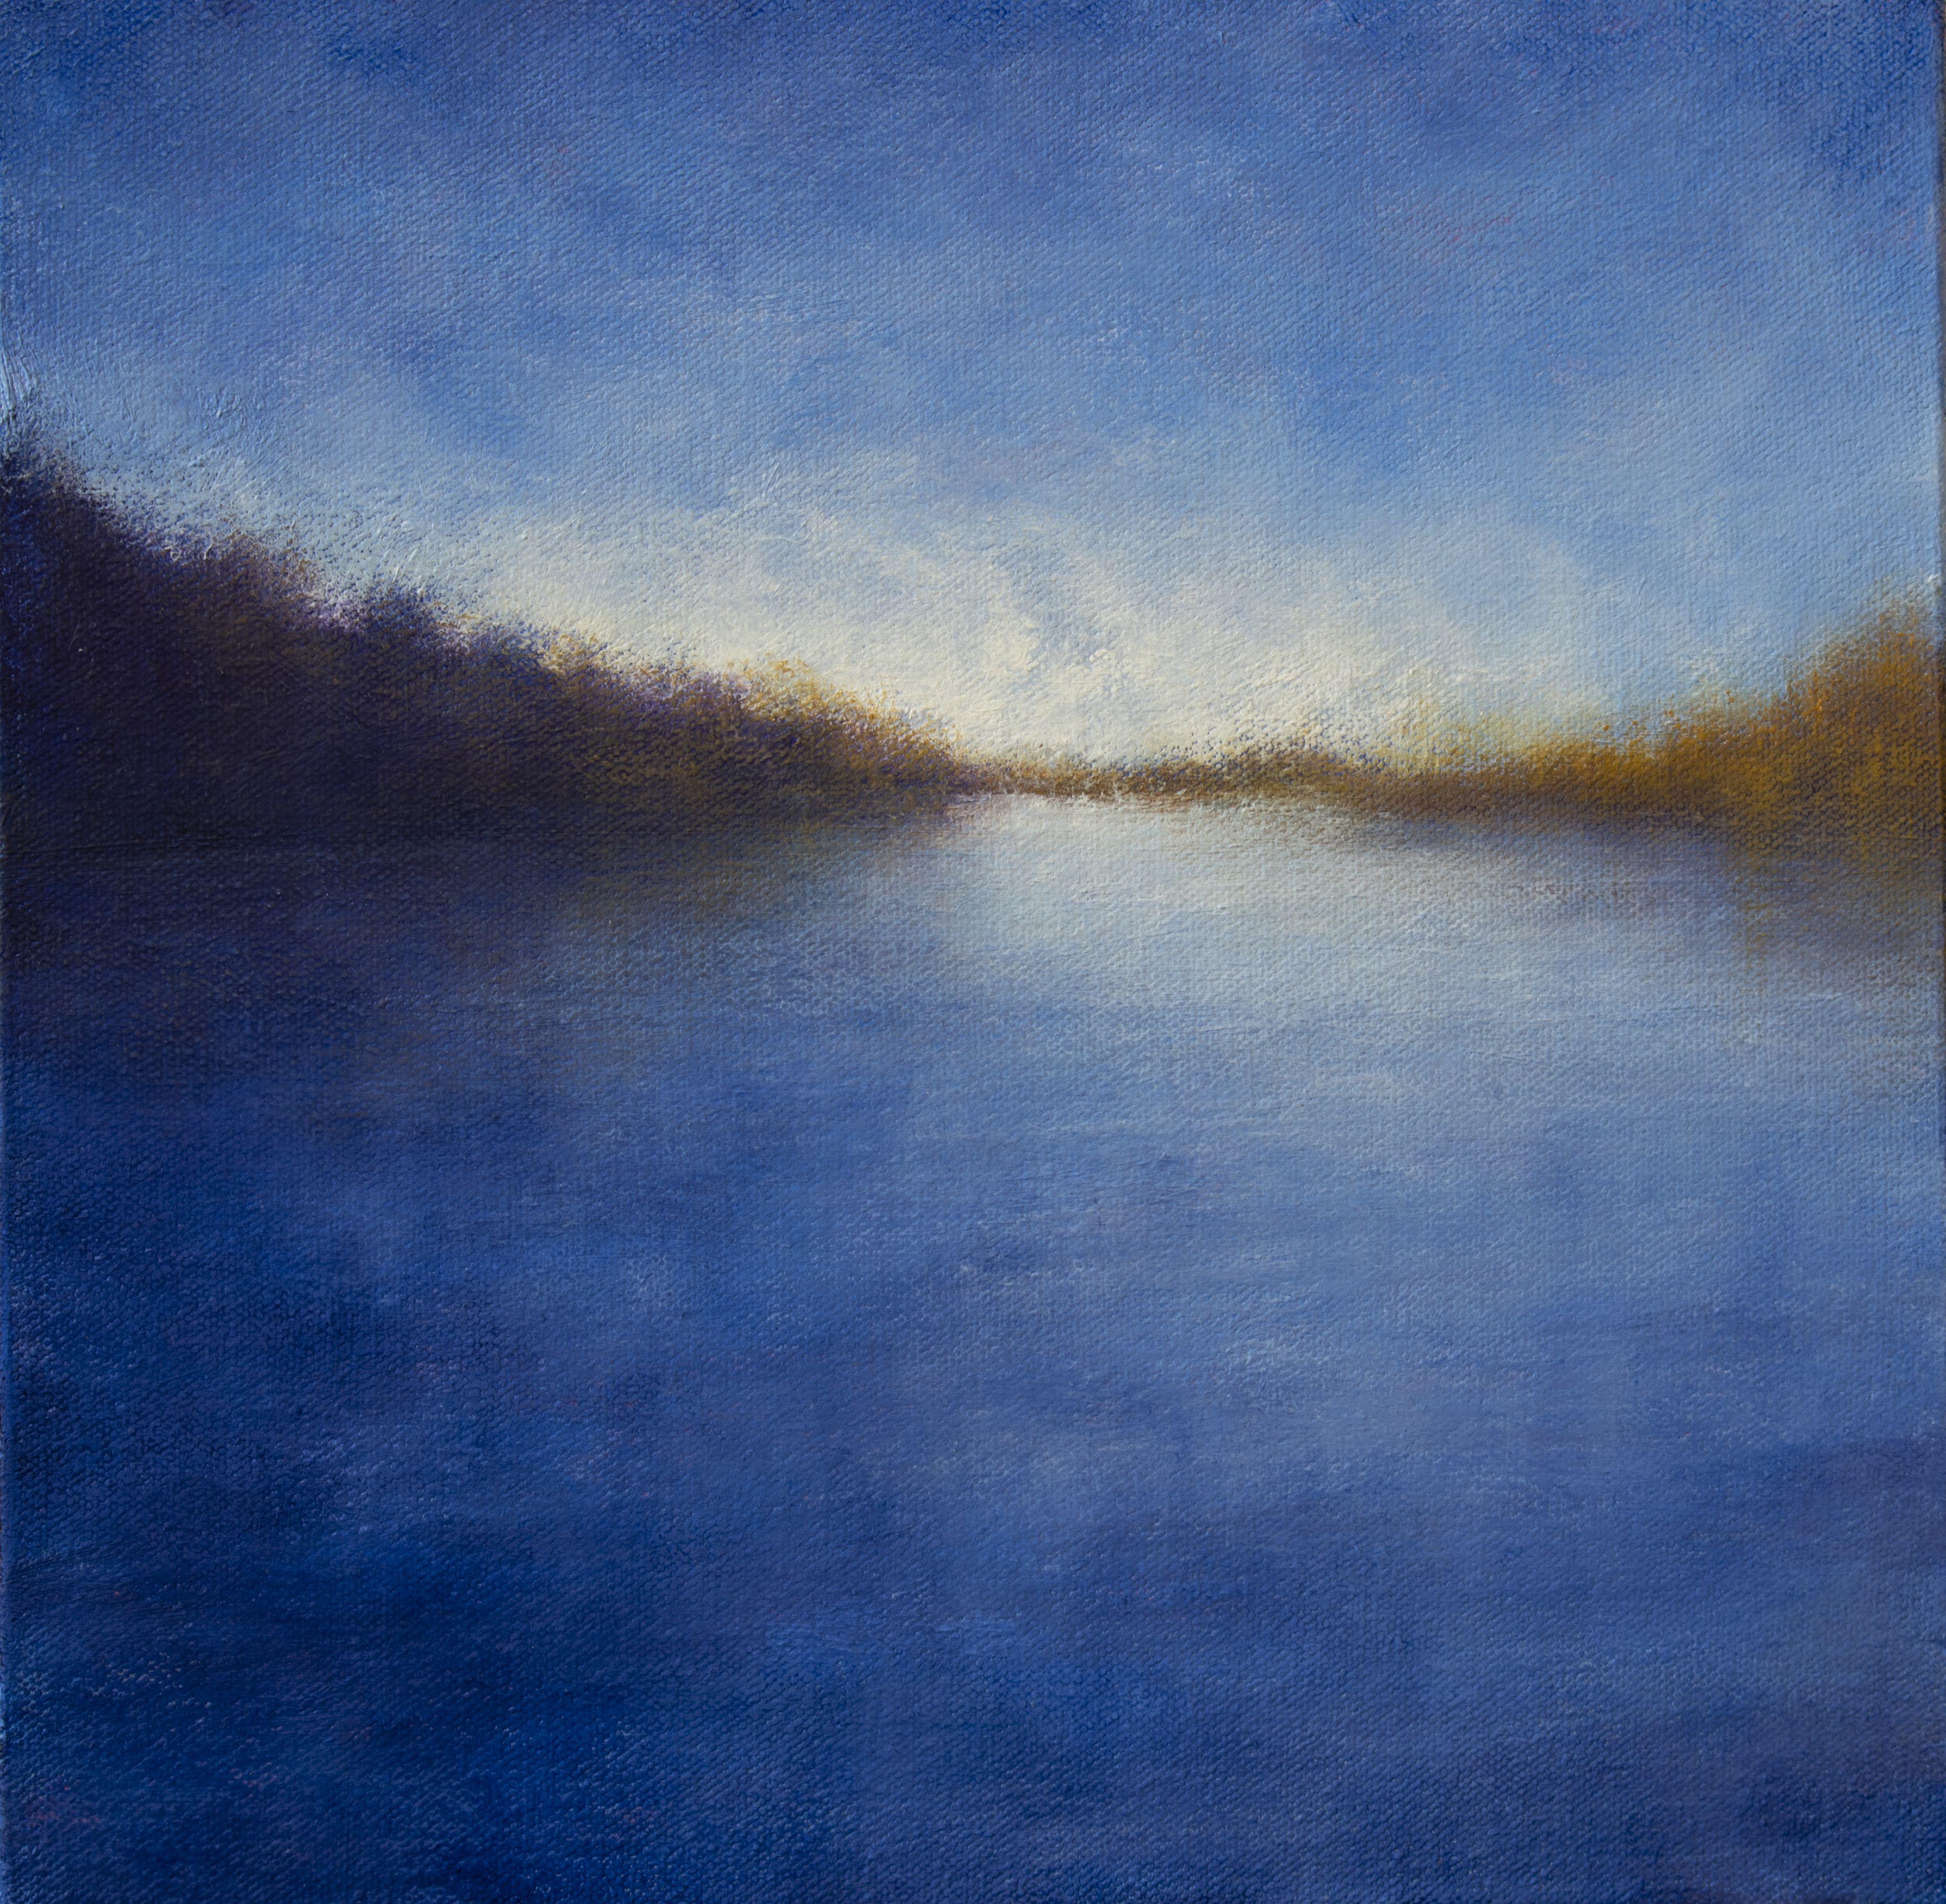 Victoria Veedell Landscape Painting - March Light, Painting, Oil on Canvas